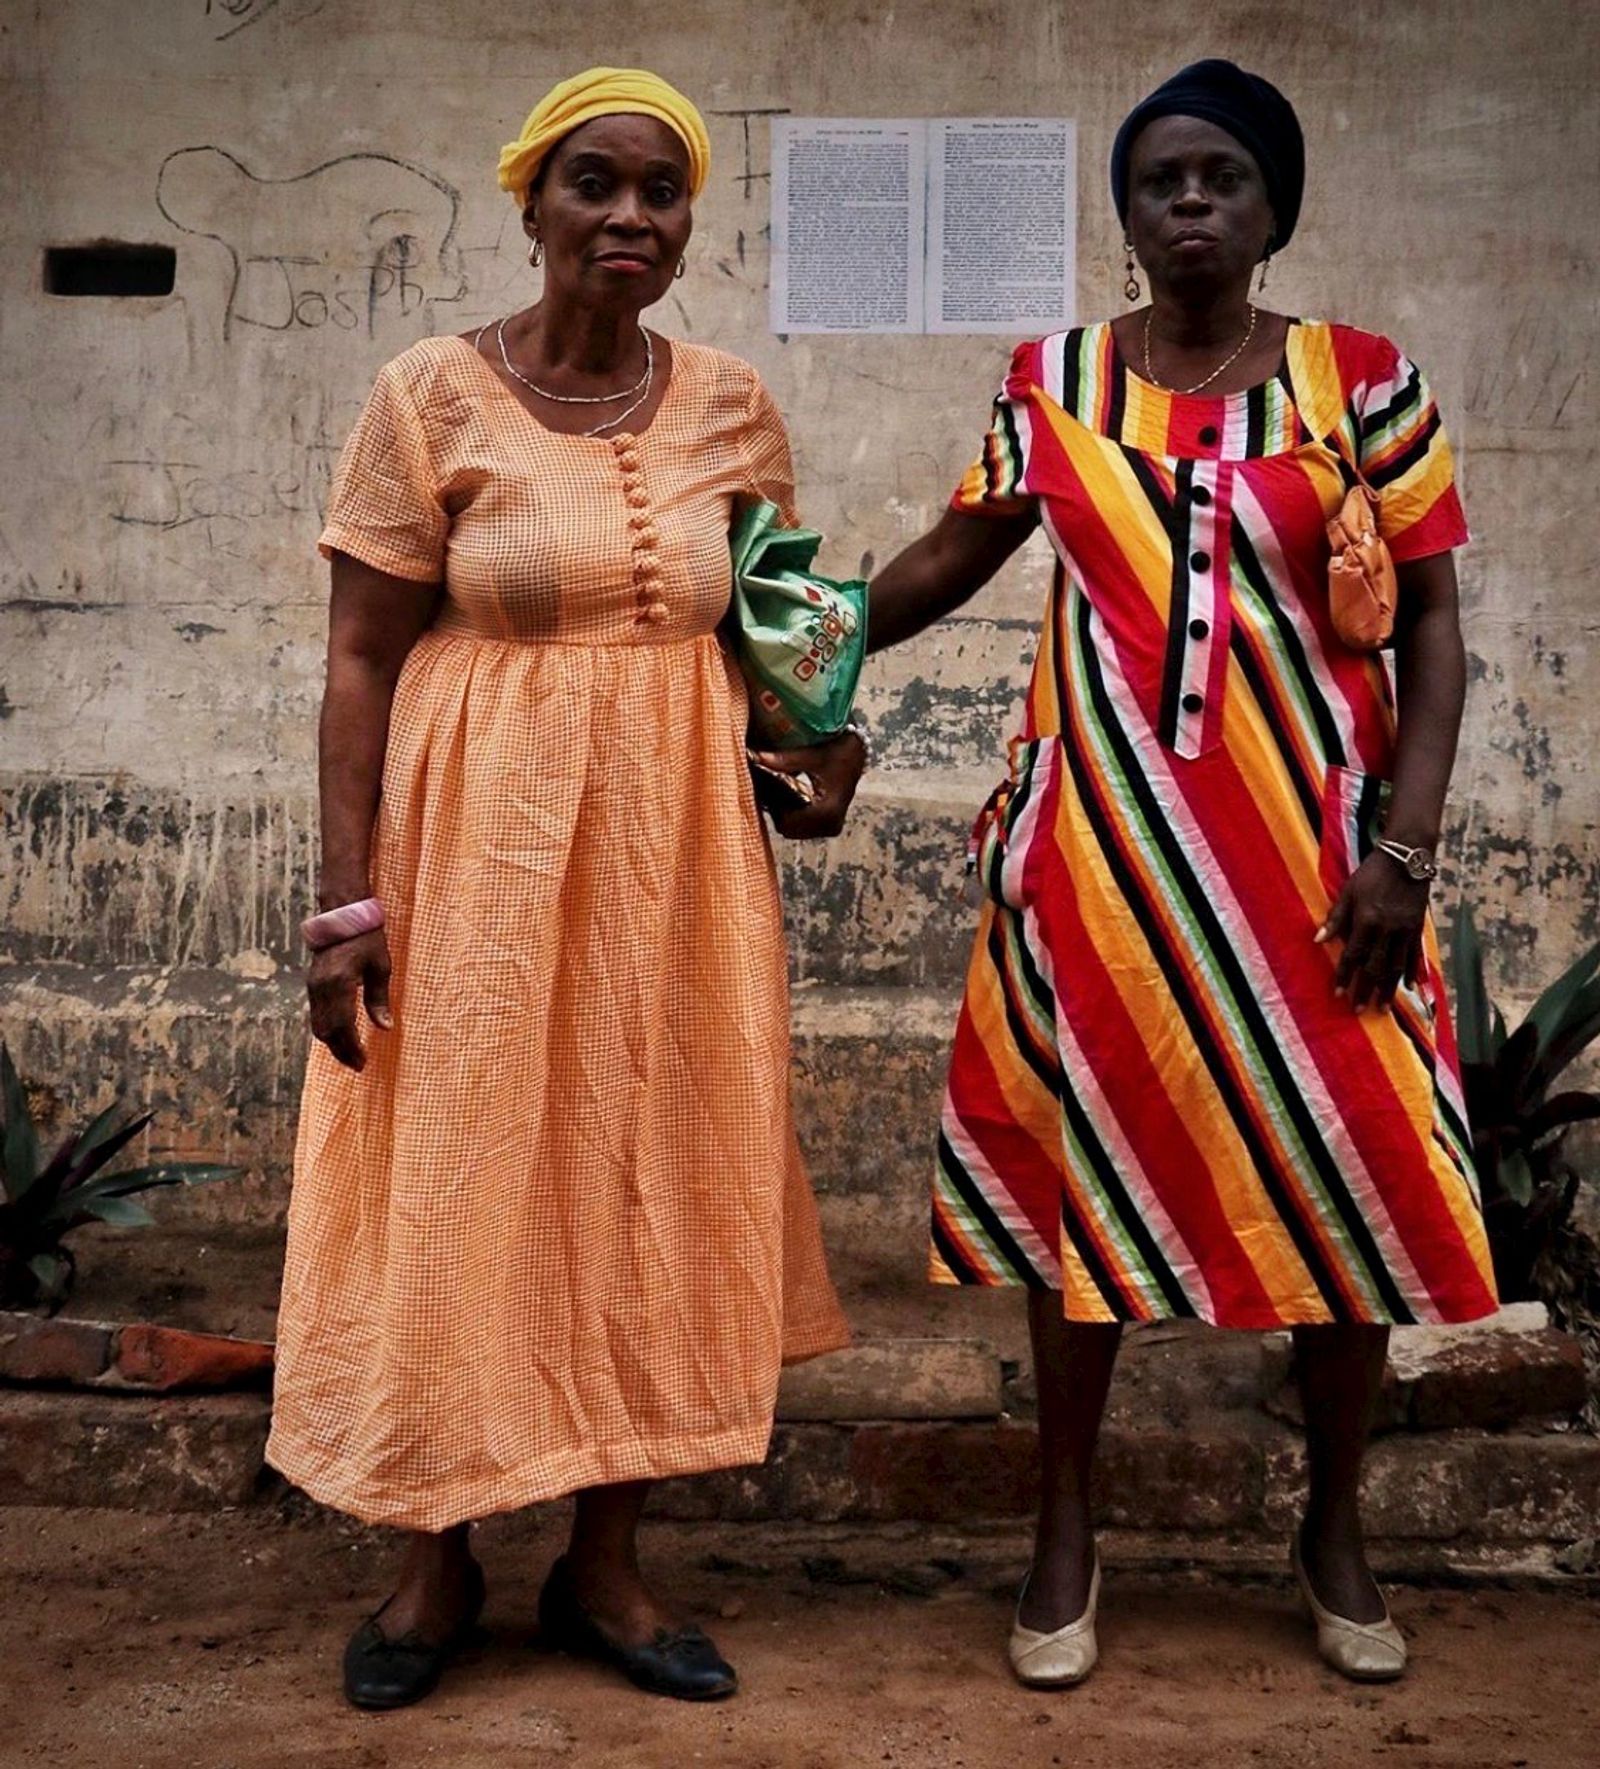 © Nwando Ebeledike - This photo was taken in Accra, Ghana and is a photo of neighbours and friends for 2 decades